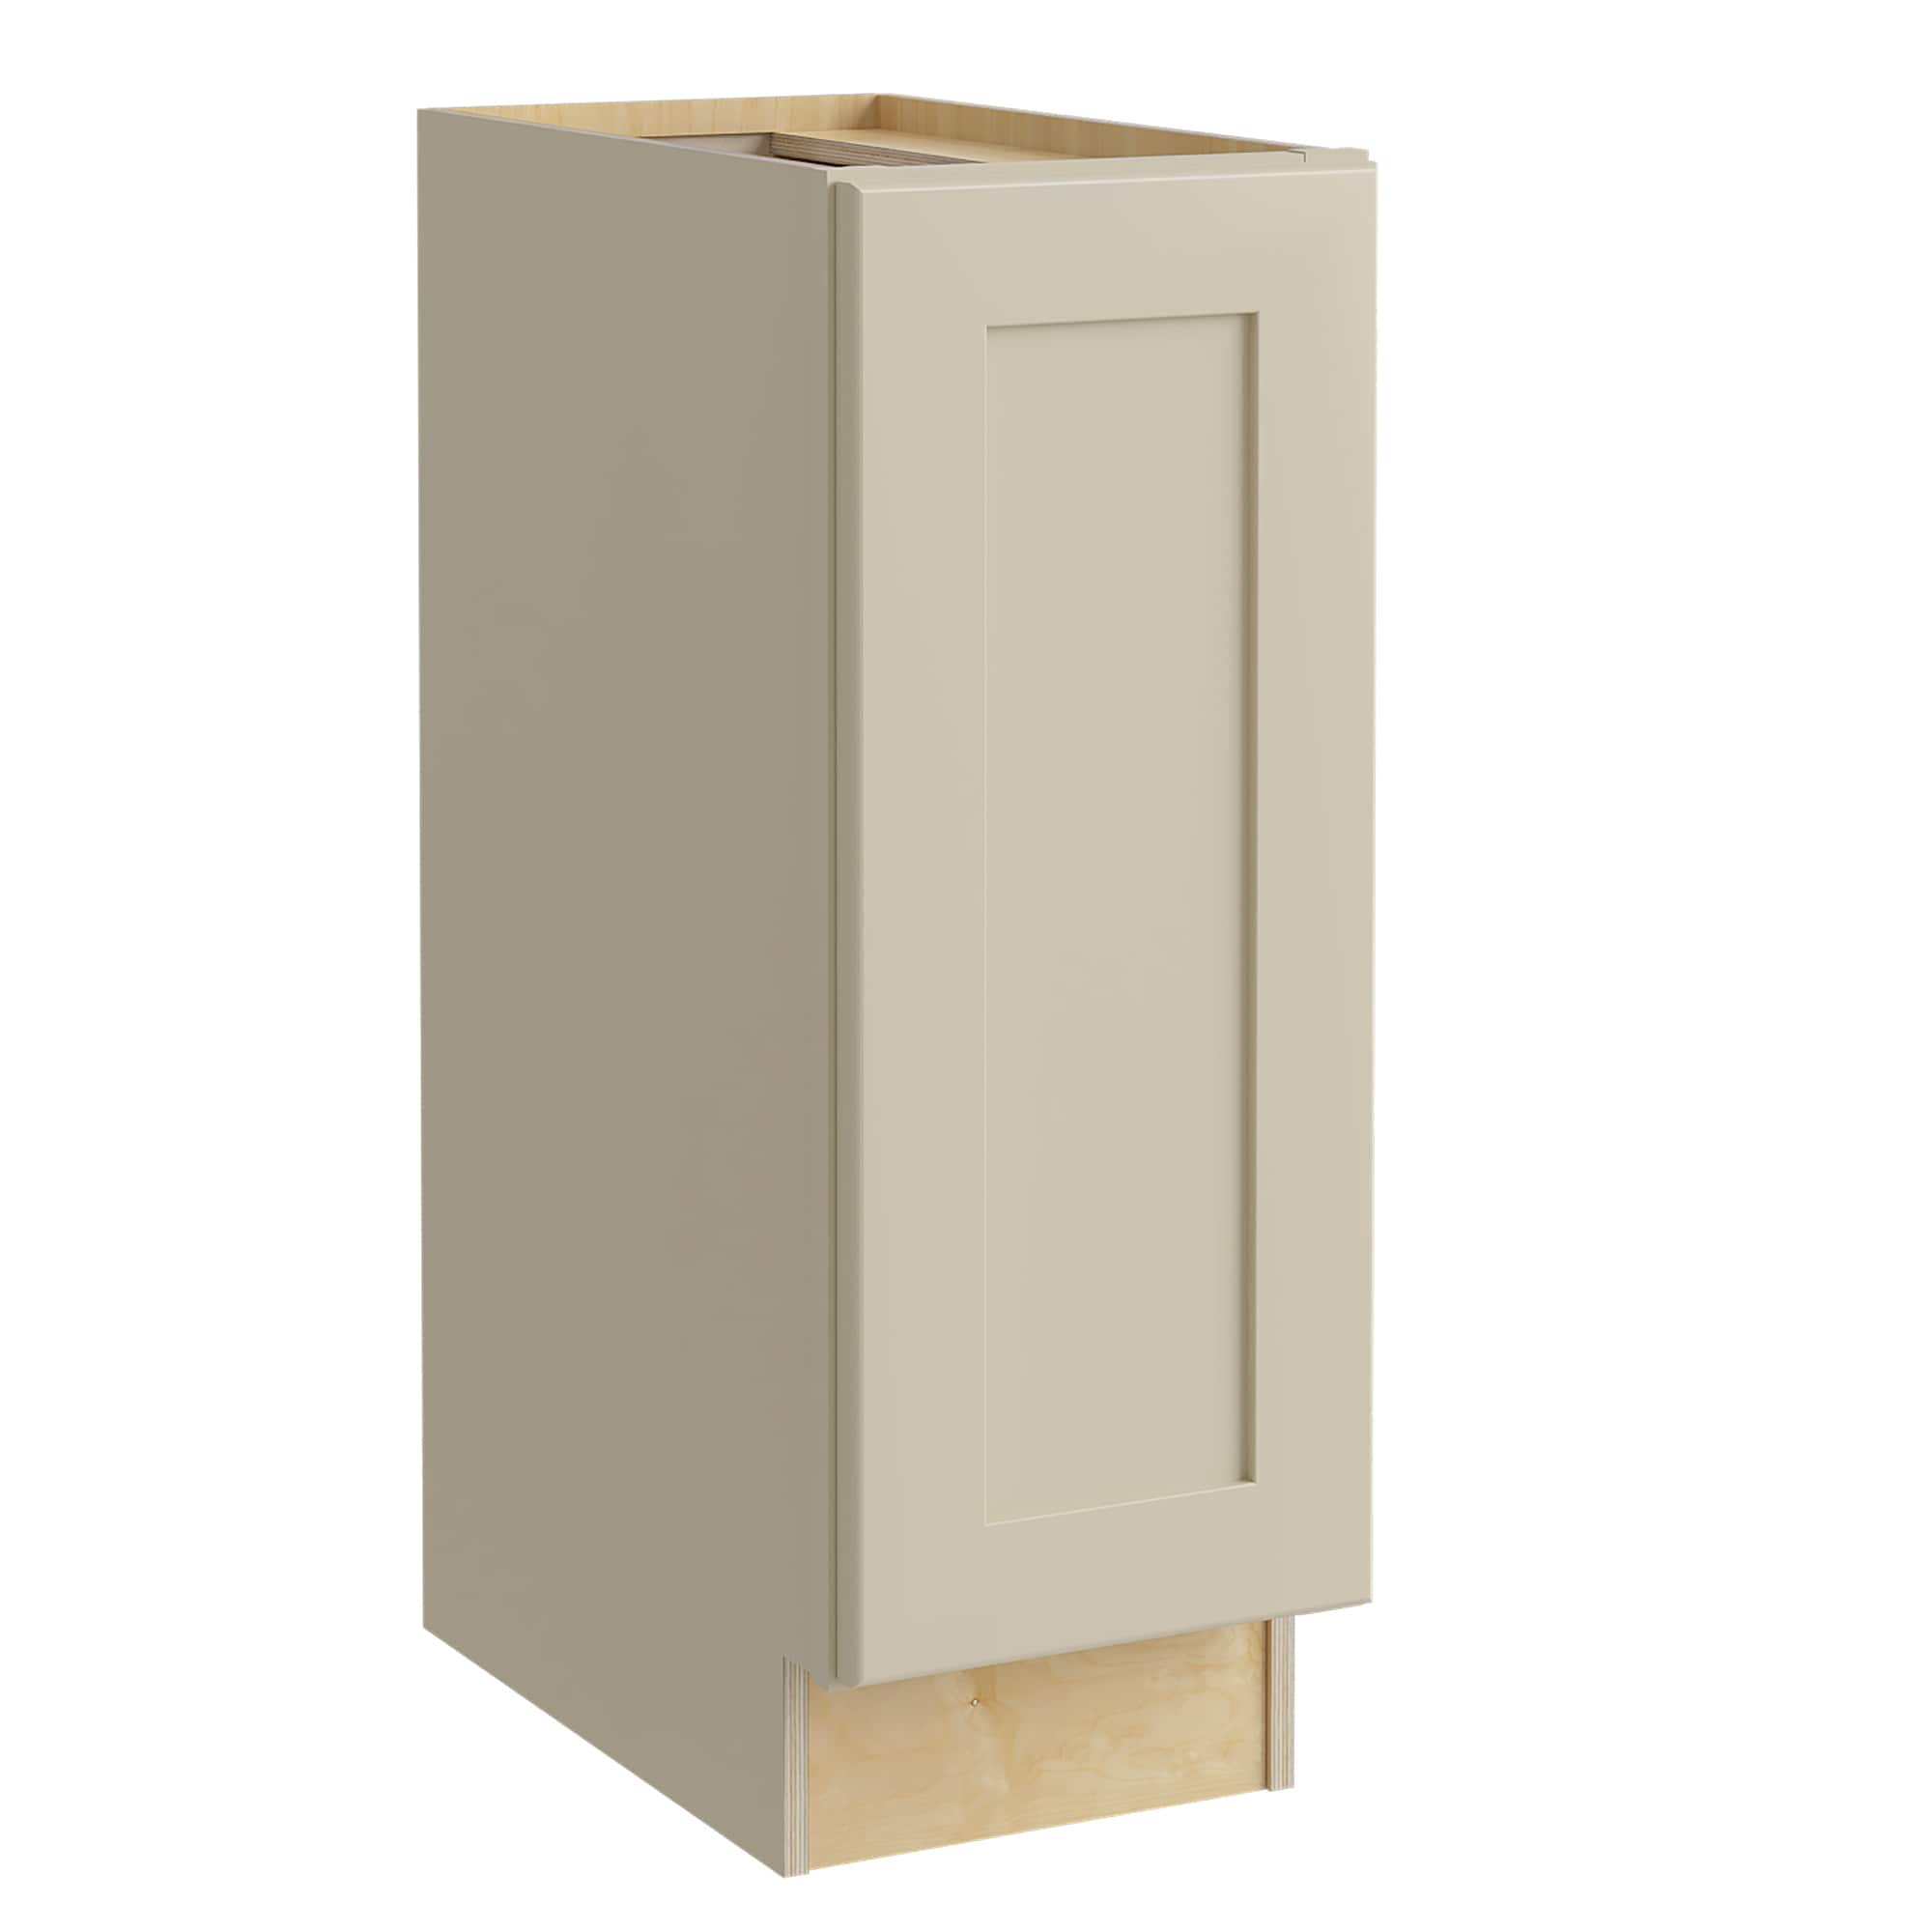 Luxxe Cabinetry 15-in W x 34.5-in H x 24-in D Norfolk Blended Cream Painted Door Base Fully Assembled Semi-custom Cabinet in Off-White | B15FHL-NBC